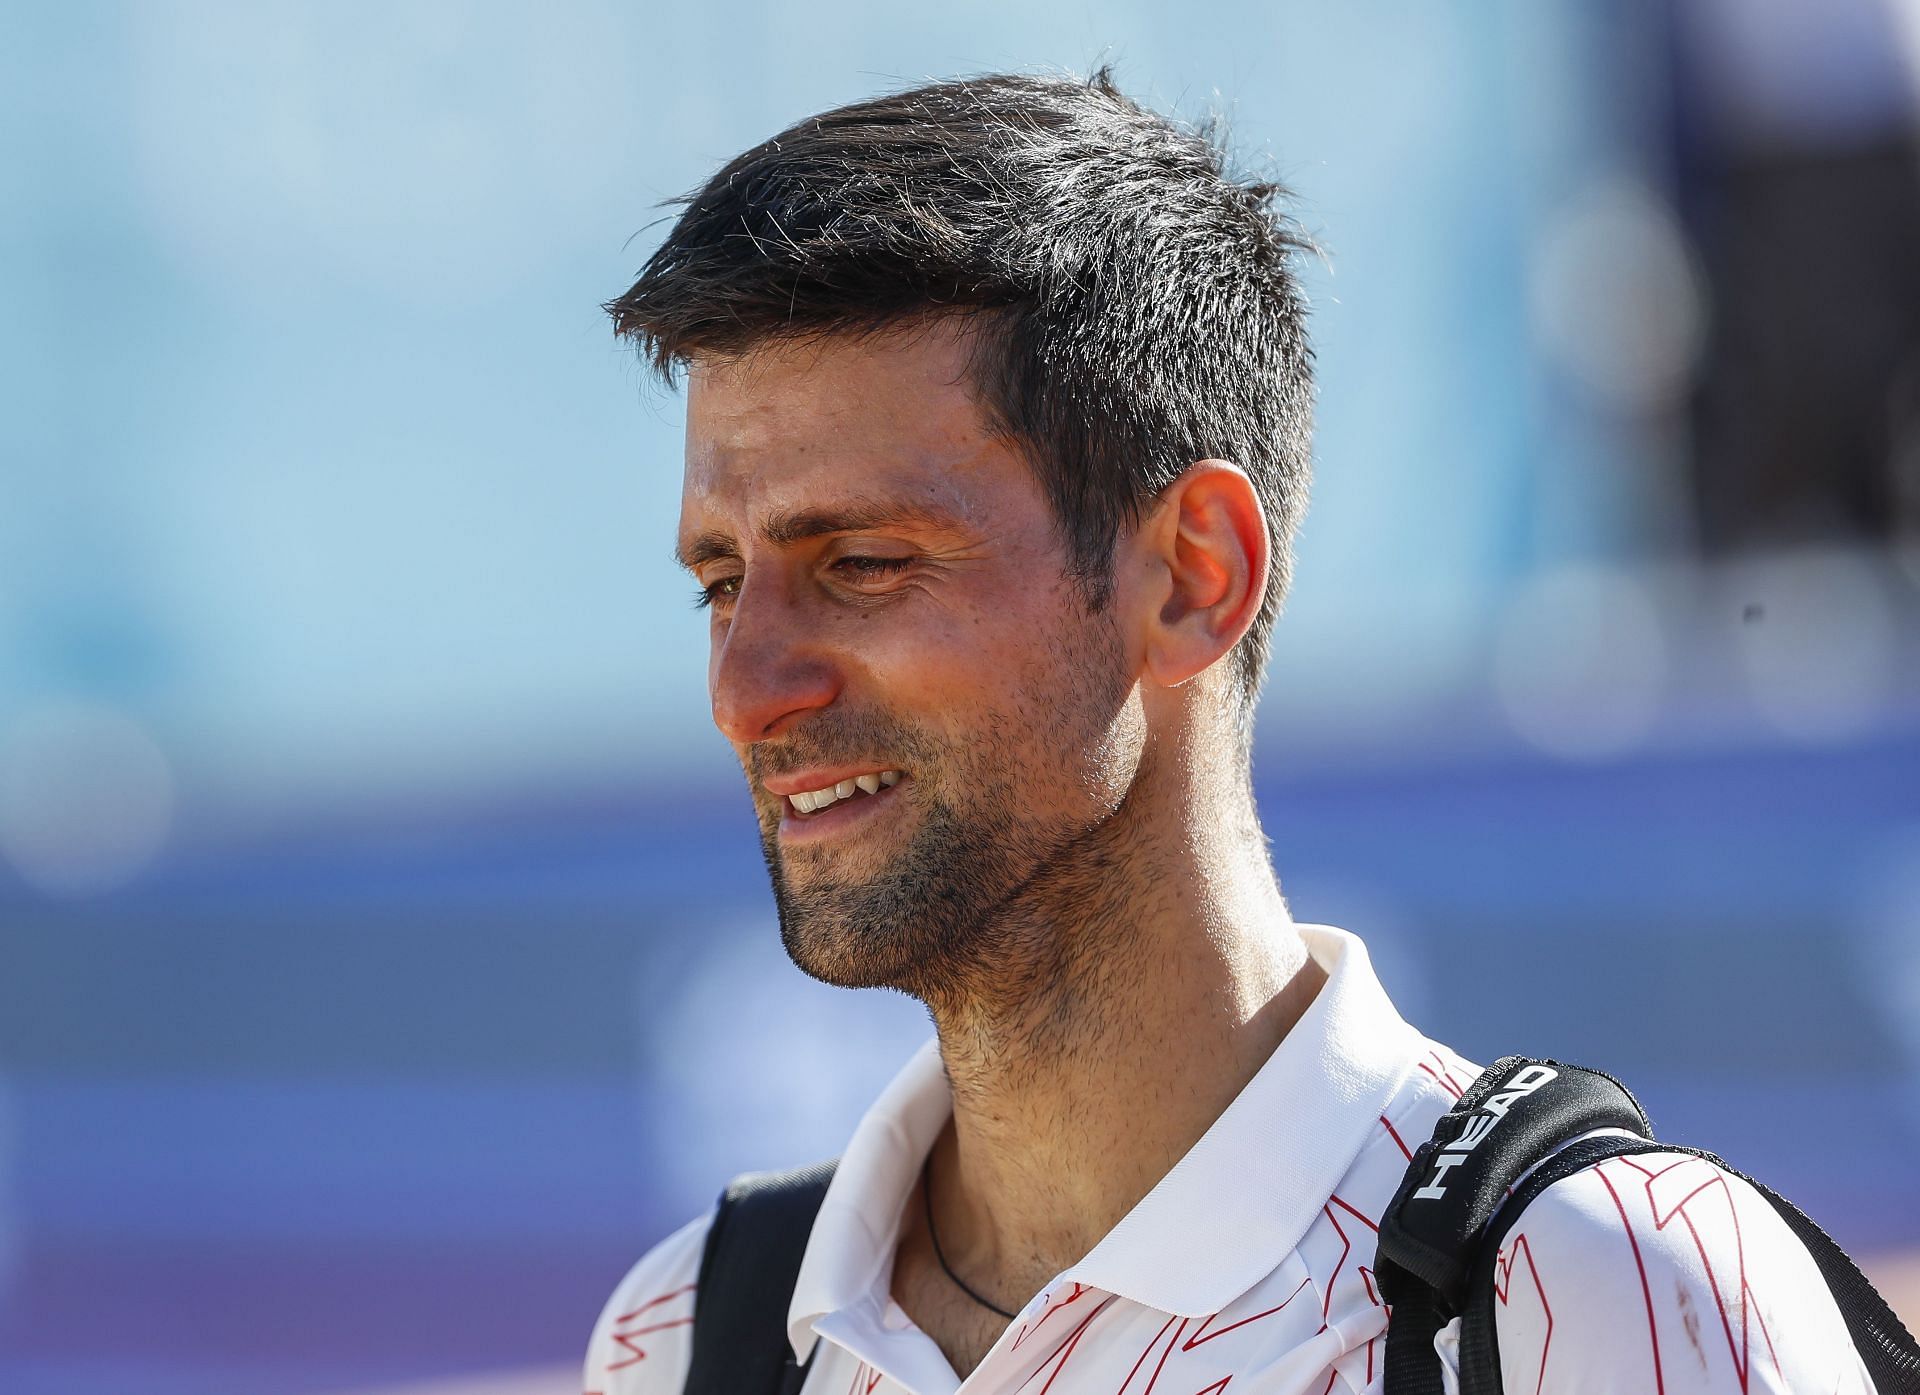 Novak Djokovic is a two-time winner at the Serbia Open